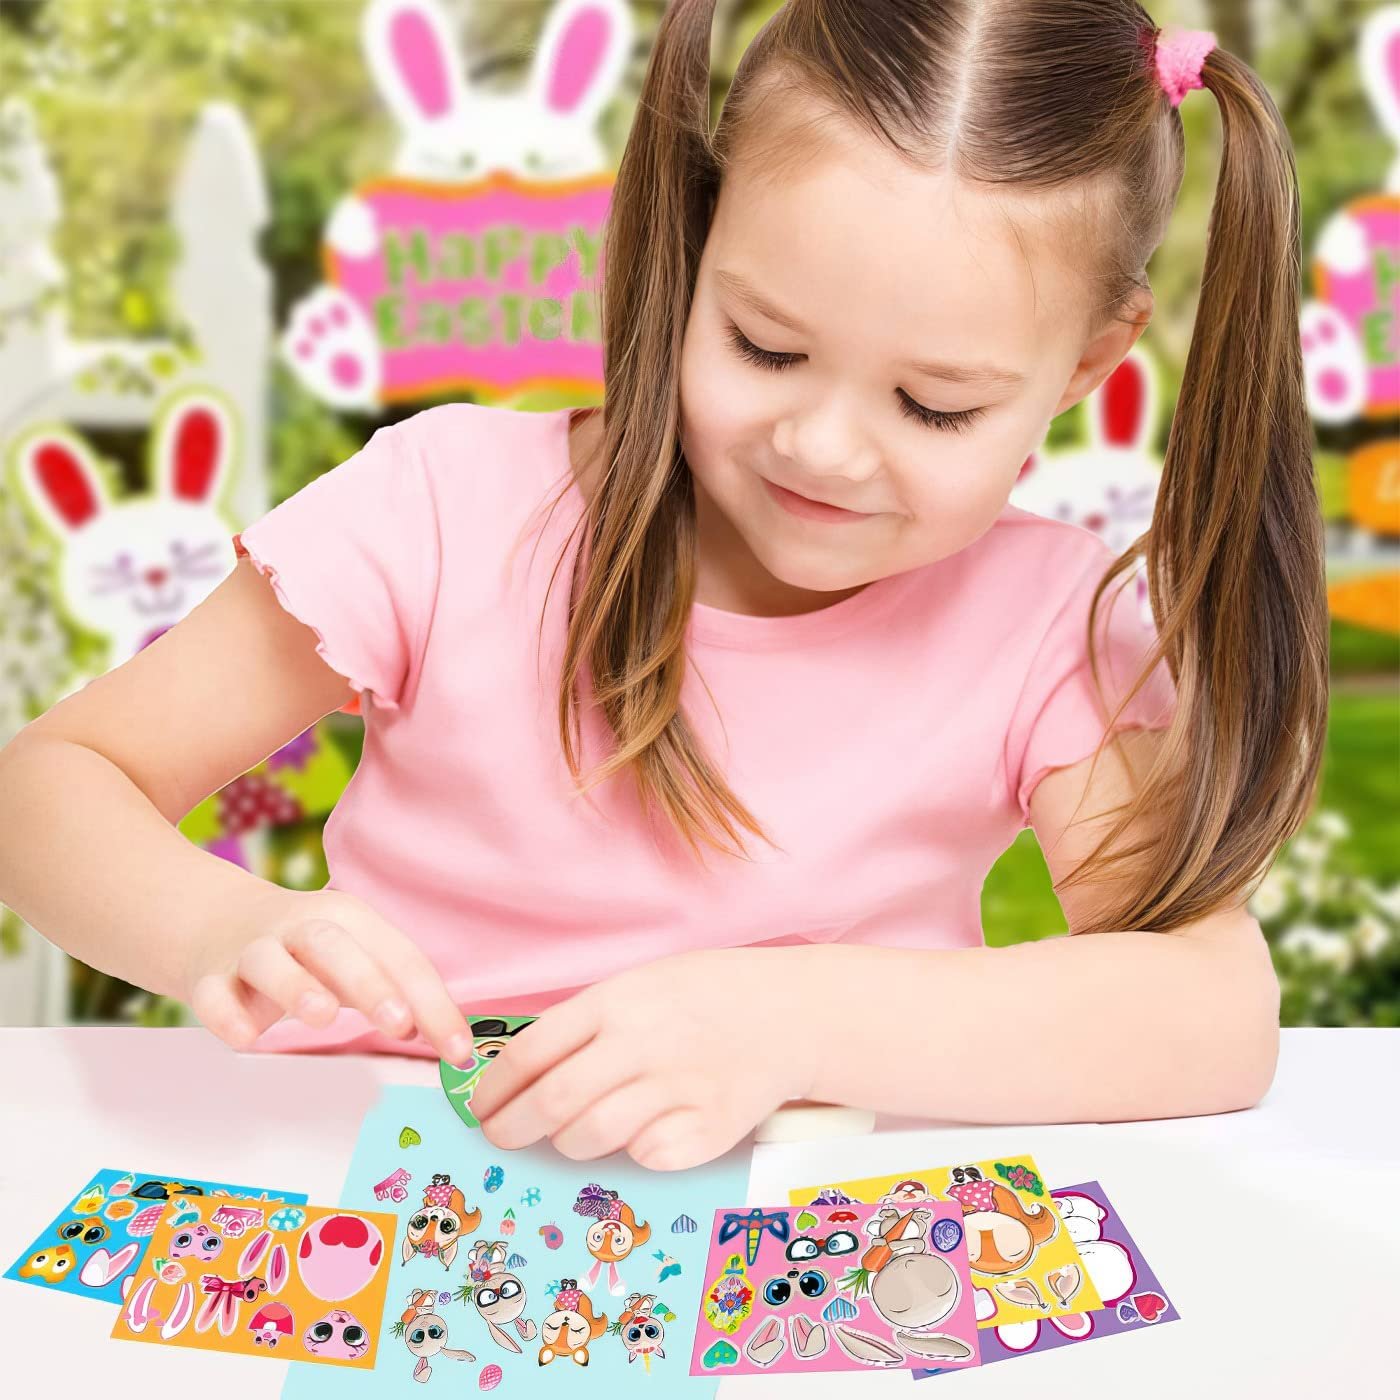 Artcreativity Easter Make Your Own Stickers, Bulk Easter Stickers for Kids, 96 Sticker Sheets with 6 Designs, Easter Basket Stuffers, Easter Egg Stickers and Bunny Stickers, Easter Crafts for Kids